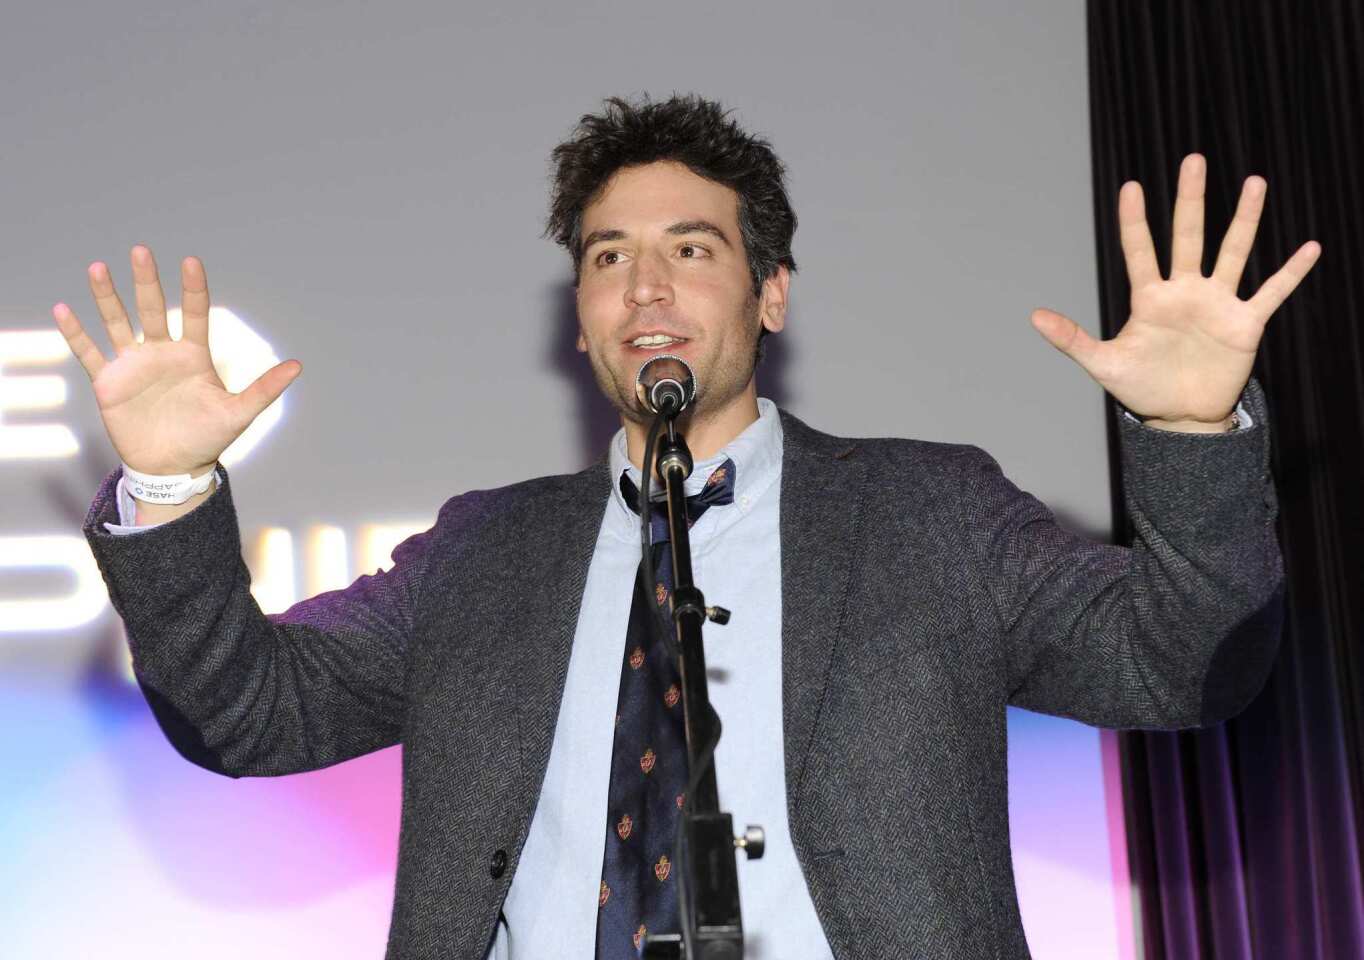 "Liberal Arts" actor and director Josh Radnor, who also stars in the series "How I Met Your Mother," takes the stage at the film's premiere party.